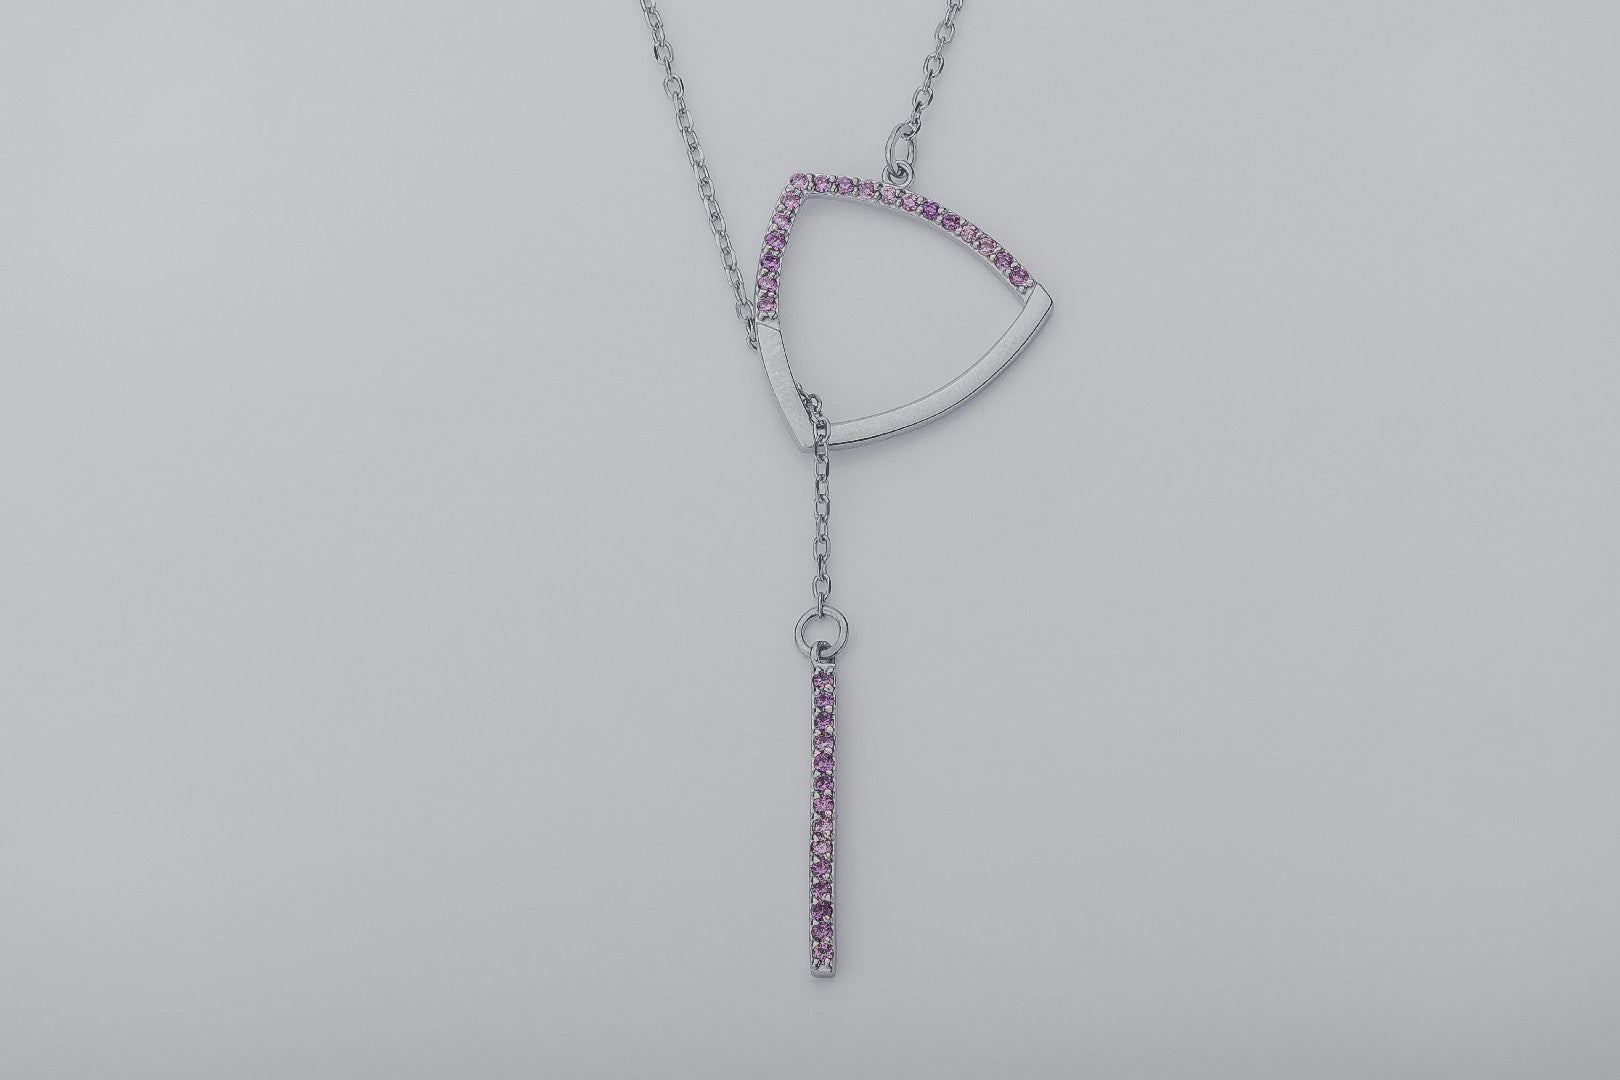 Strict Personality Pendant with Purple Gems, Rhodium Plated 925 Silver